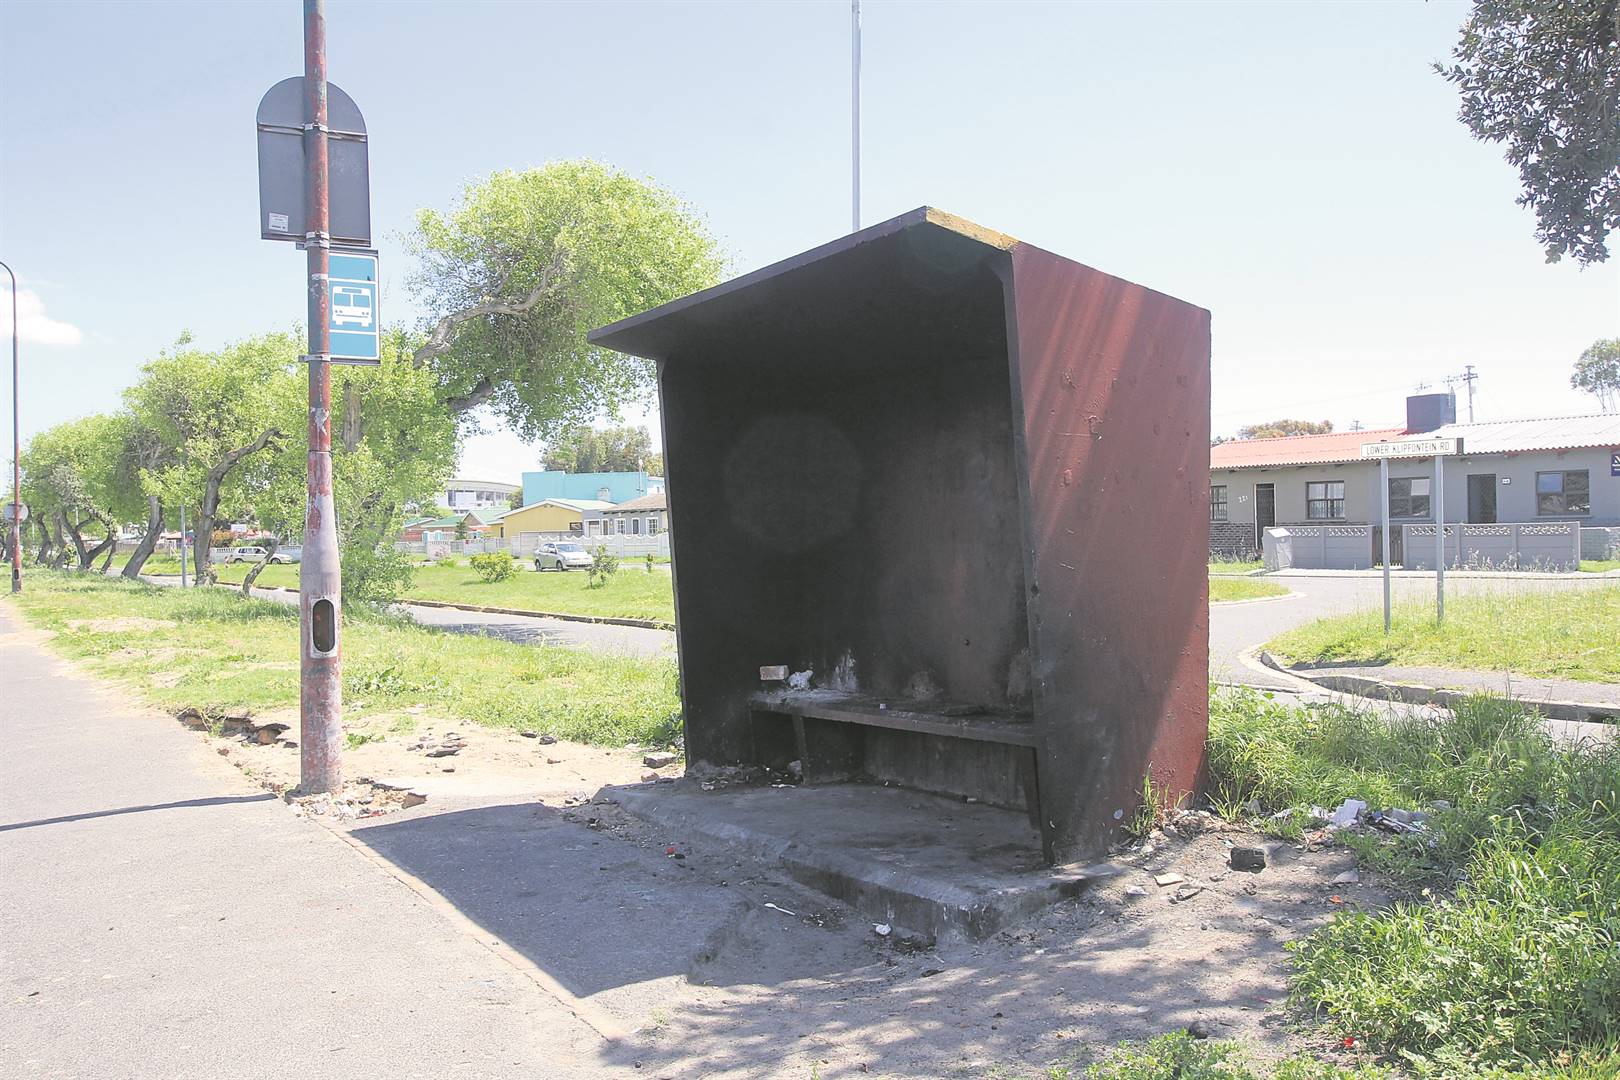 Bus shelters along Klipfontein Road are now breeding grounds for unsavoury activity, say residents.PHOTO: Samantha Lee-Jacobs